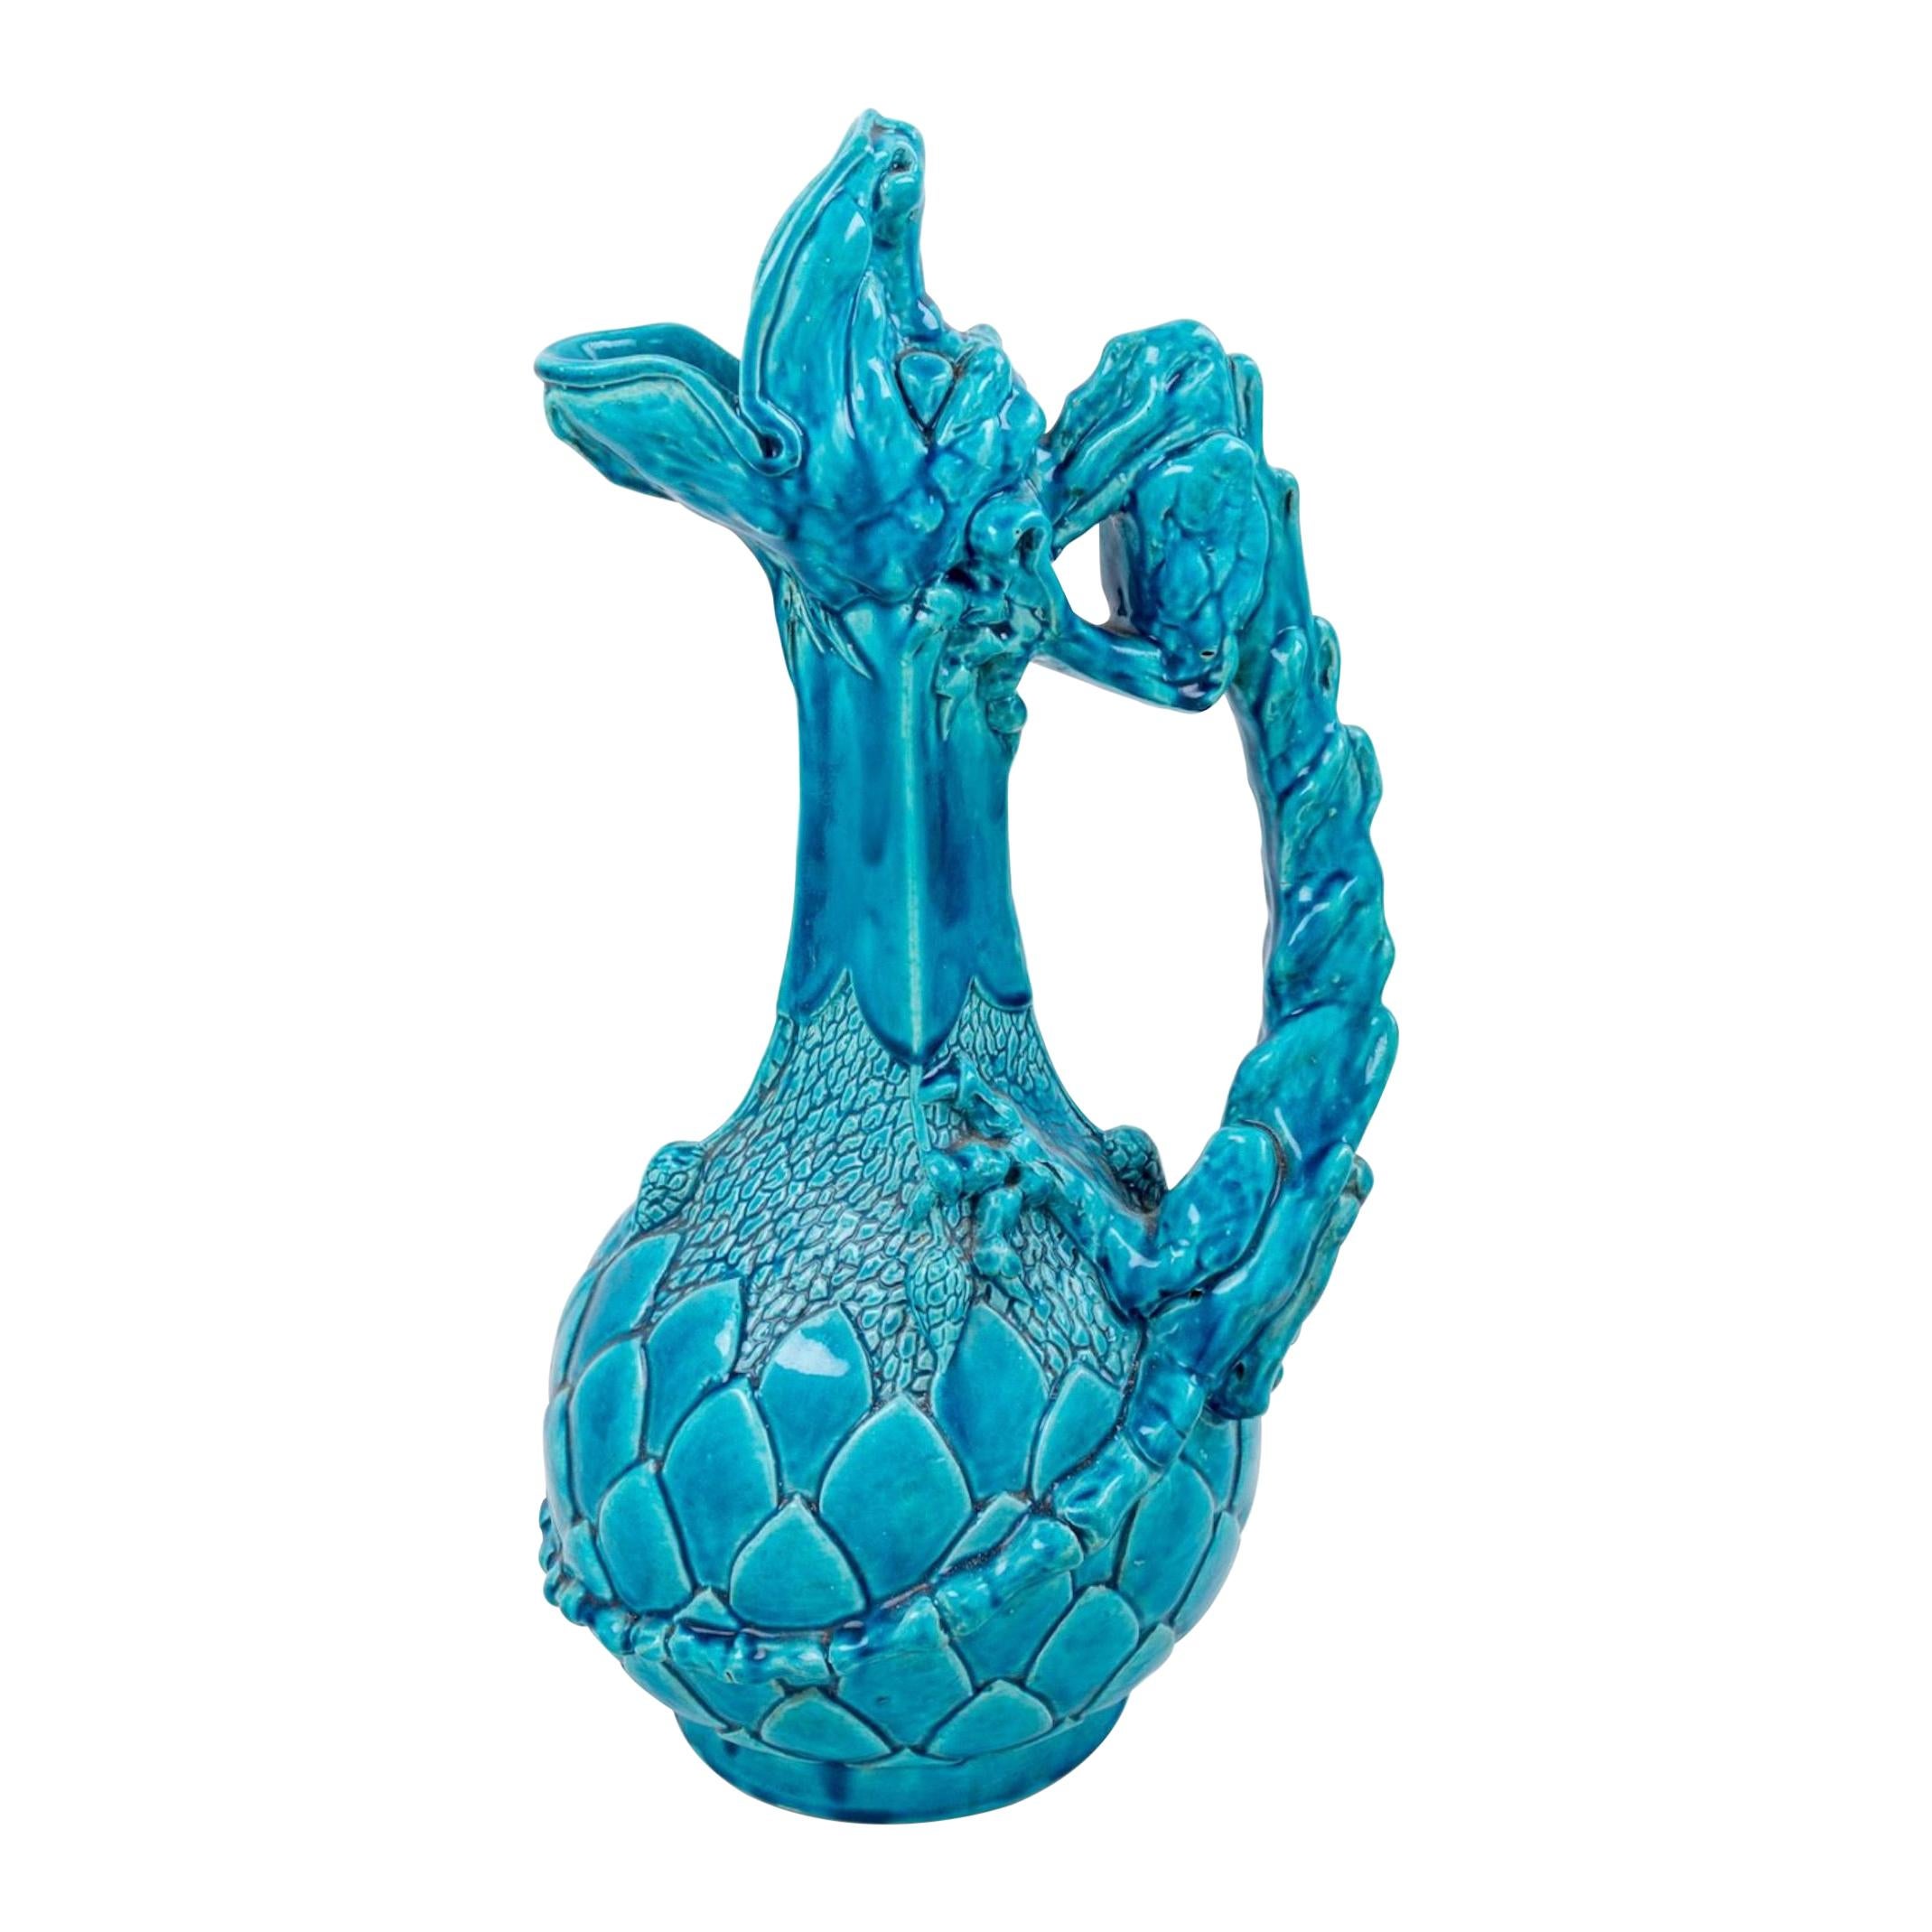 19th Century ContinentalTurquoise Glazed Figural Ewer Attributed to Theodor Deck For Sale